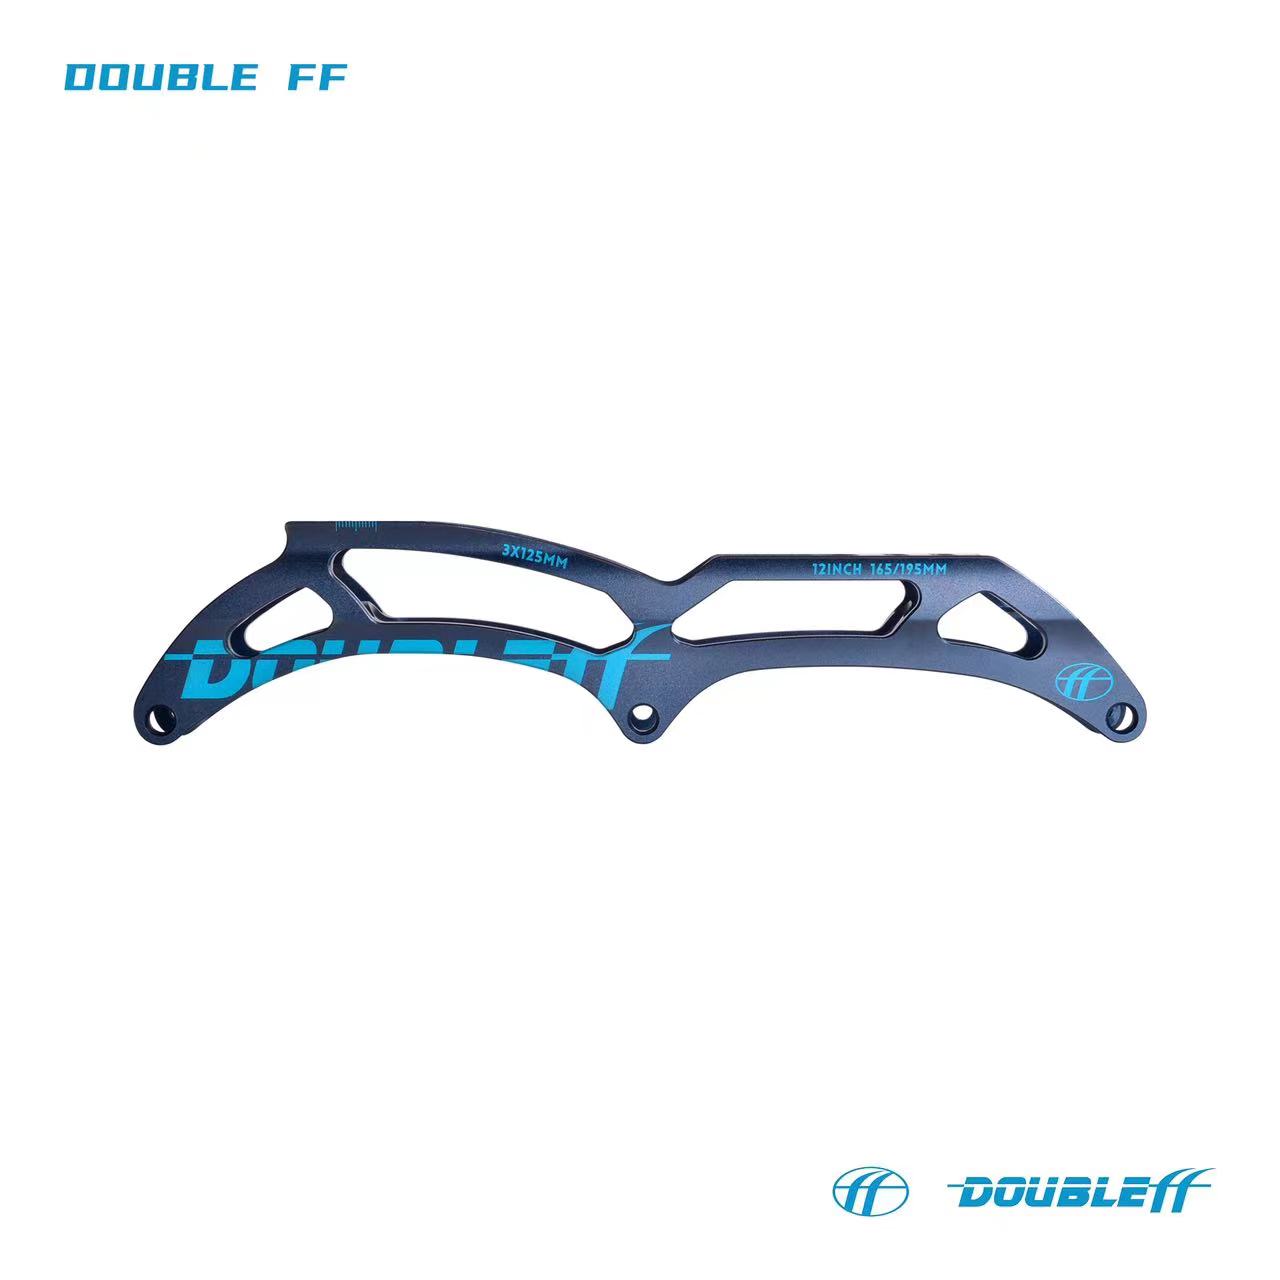 Double FF Speed Skate Frame 7005 Aluminum professional competition Inline Skate Frames